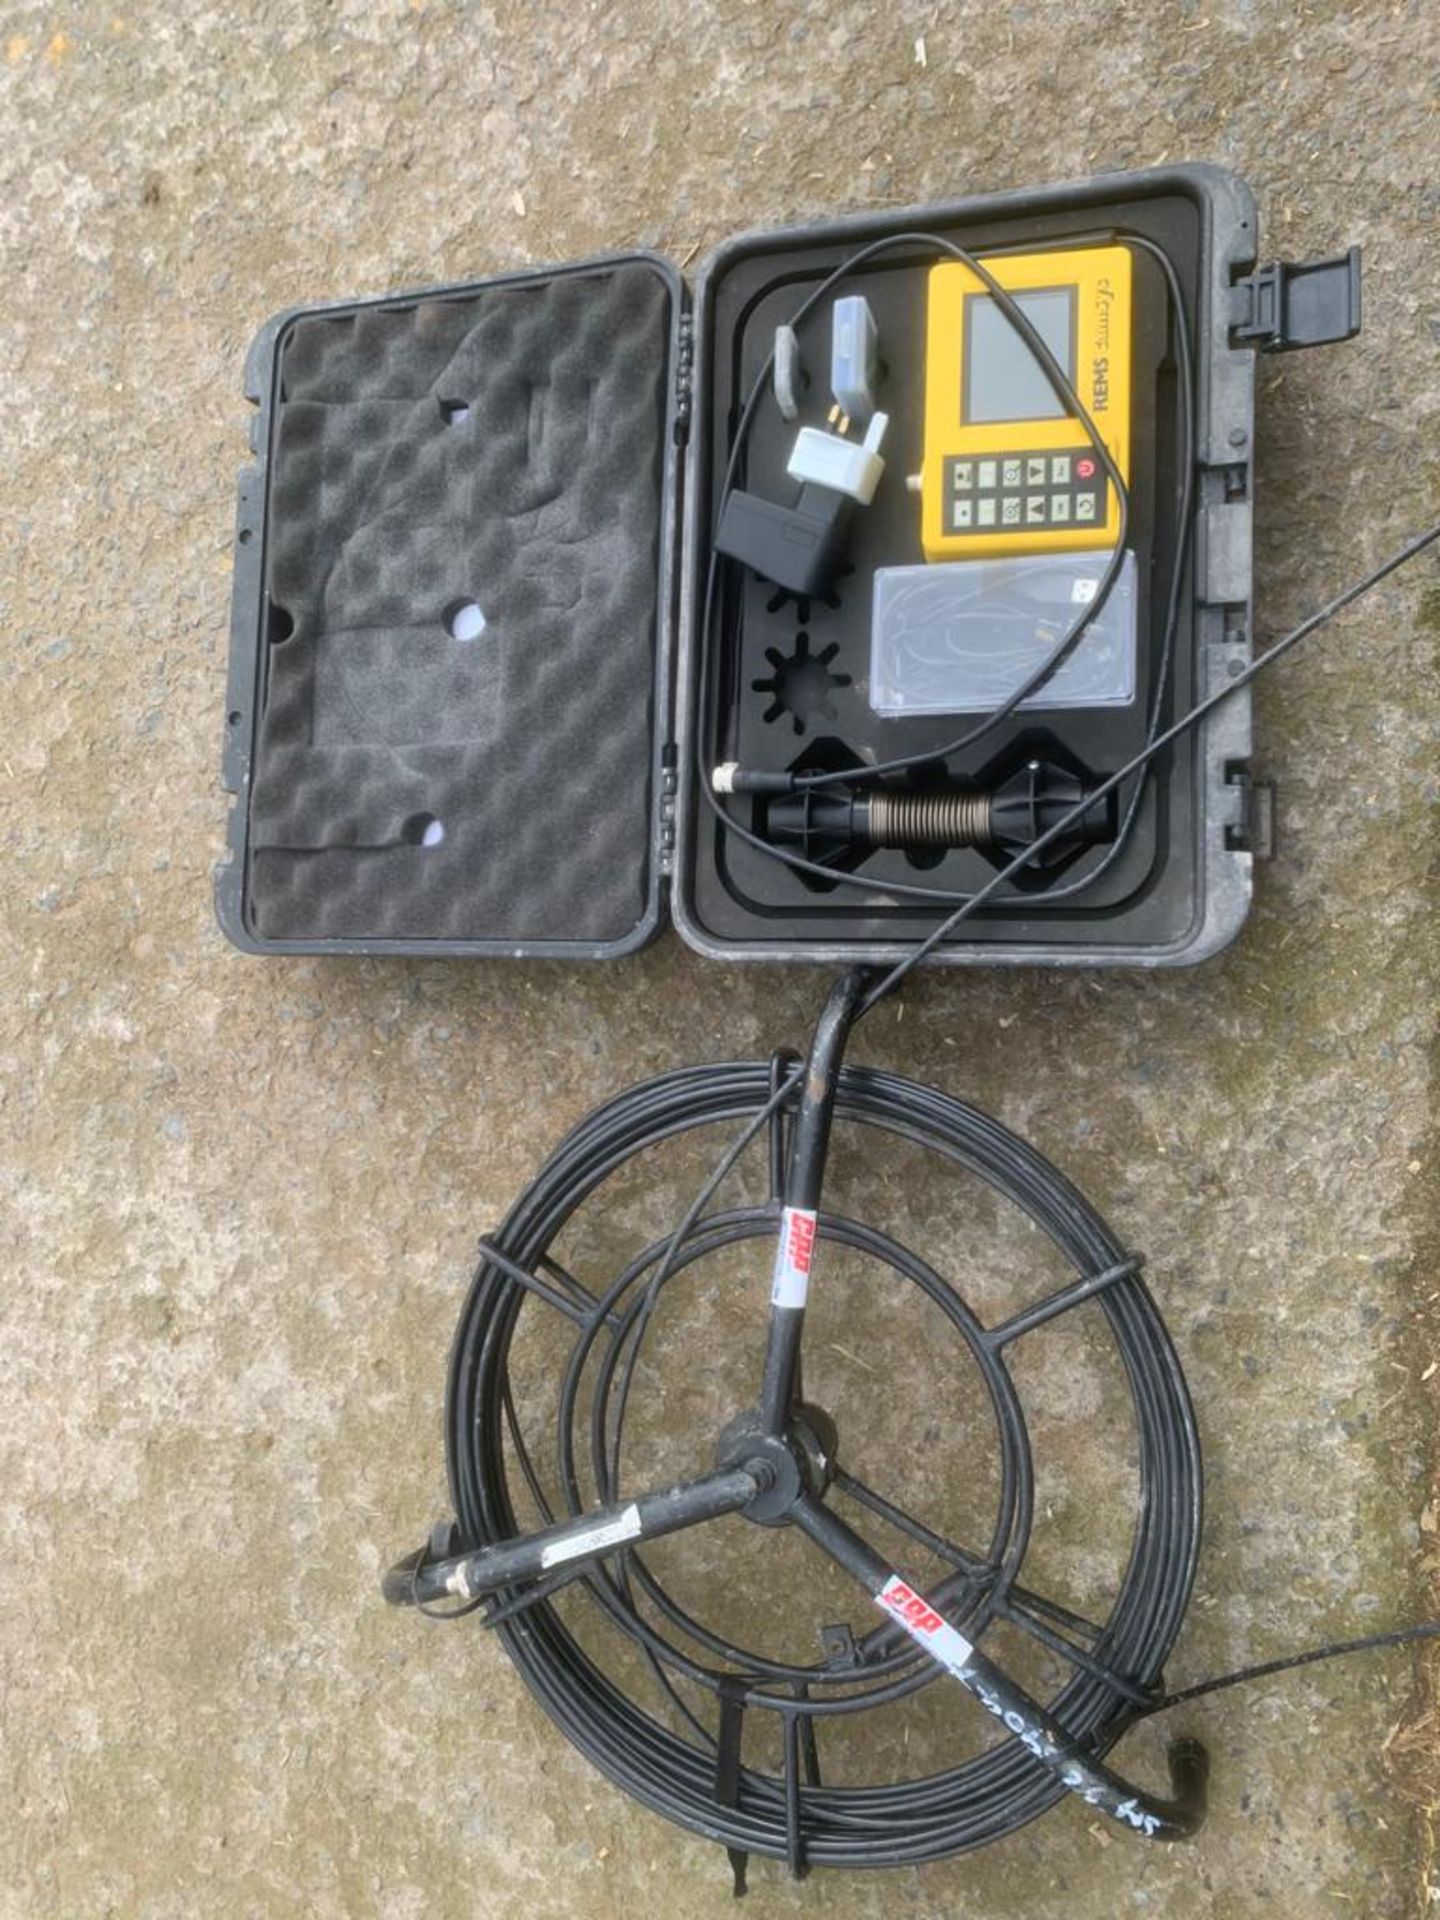 REM’s Drain Inspection Camera and Reel